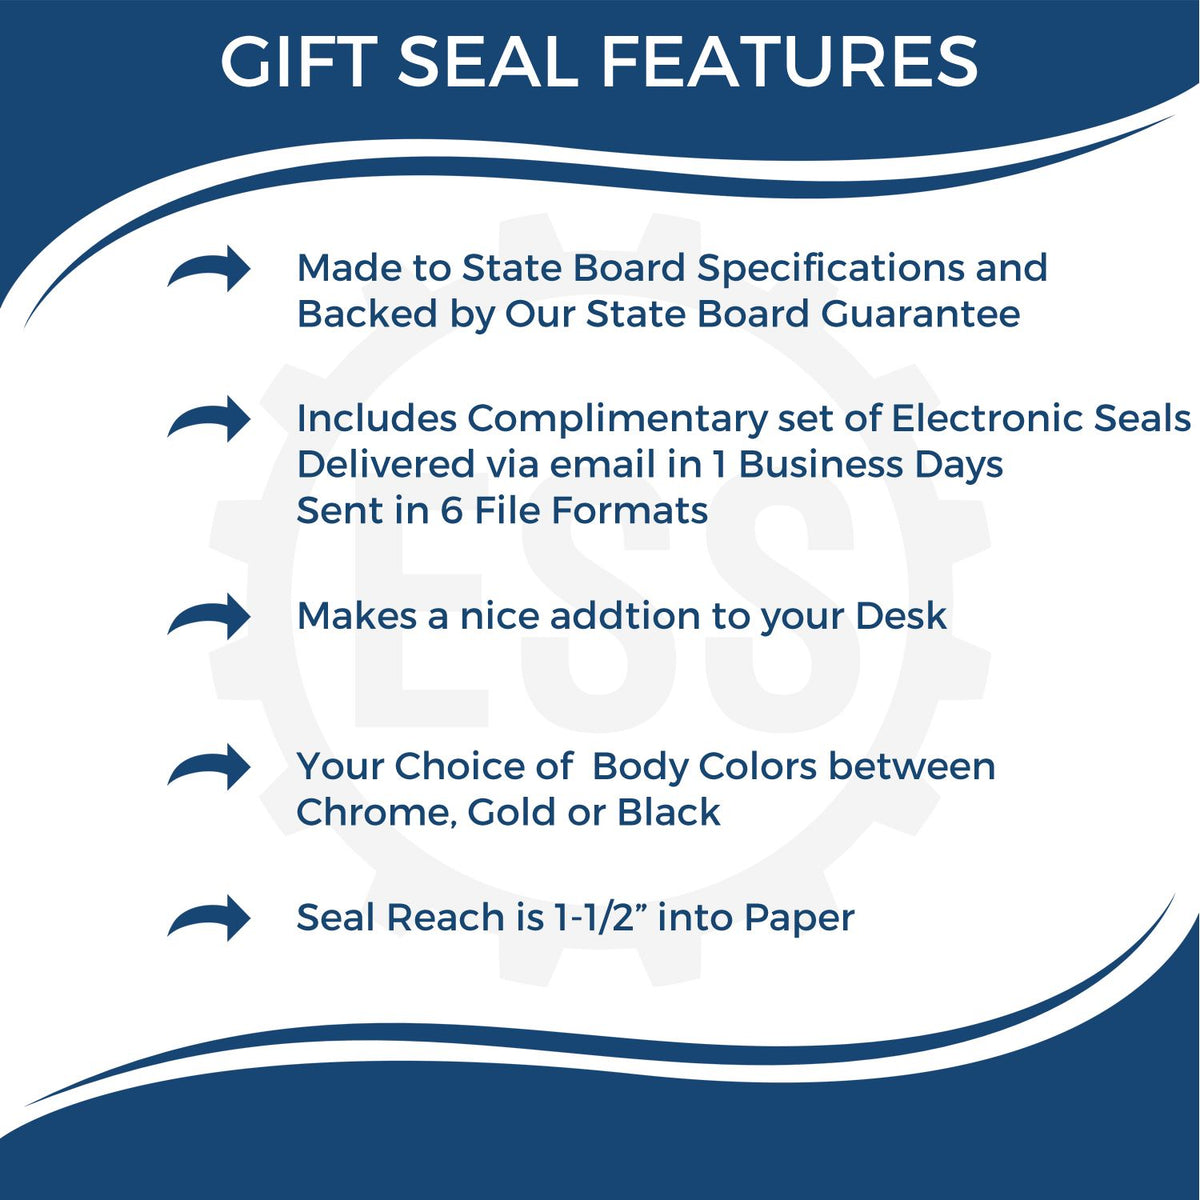 A picture of an infographic highlighting the selling points for the Gift Washington Engineer Seal